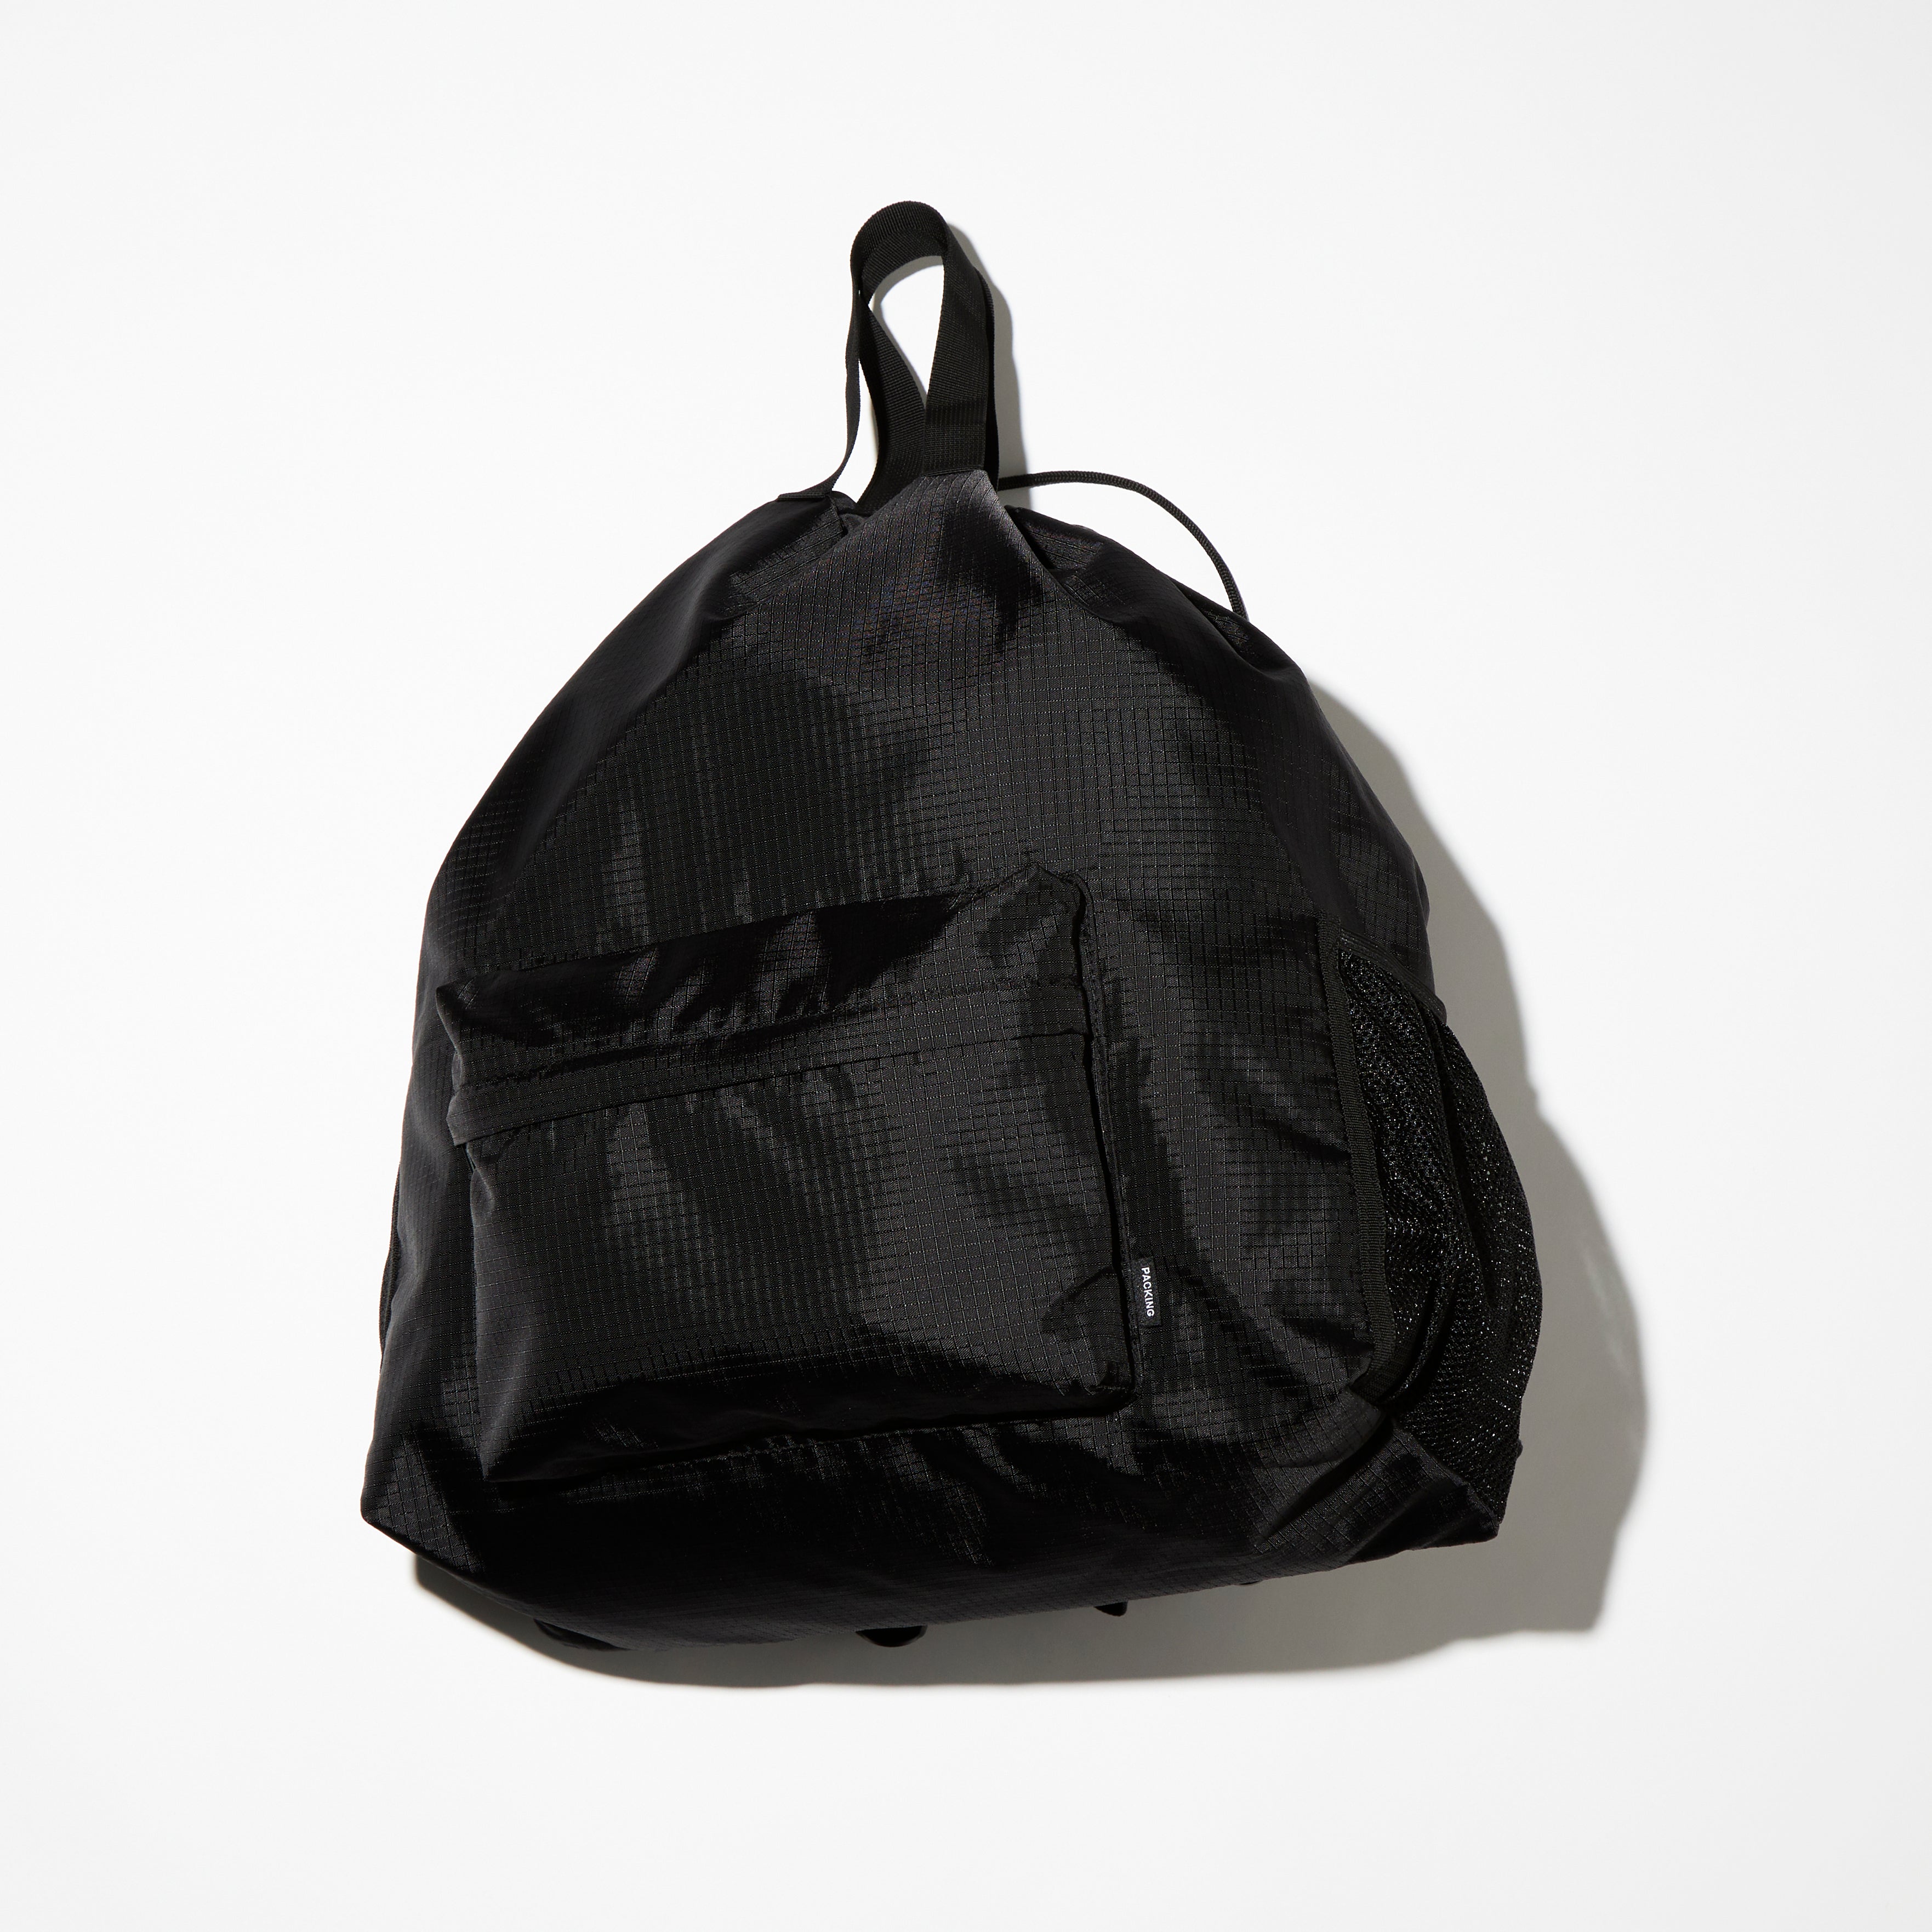 NAP BACKPACK / PACKING